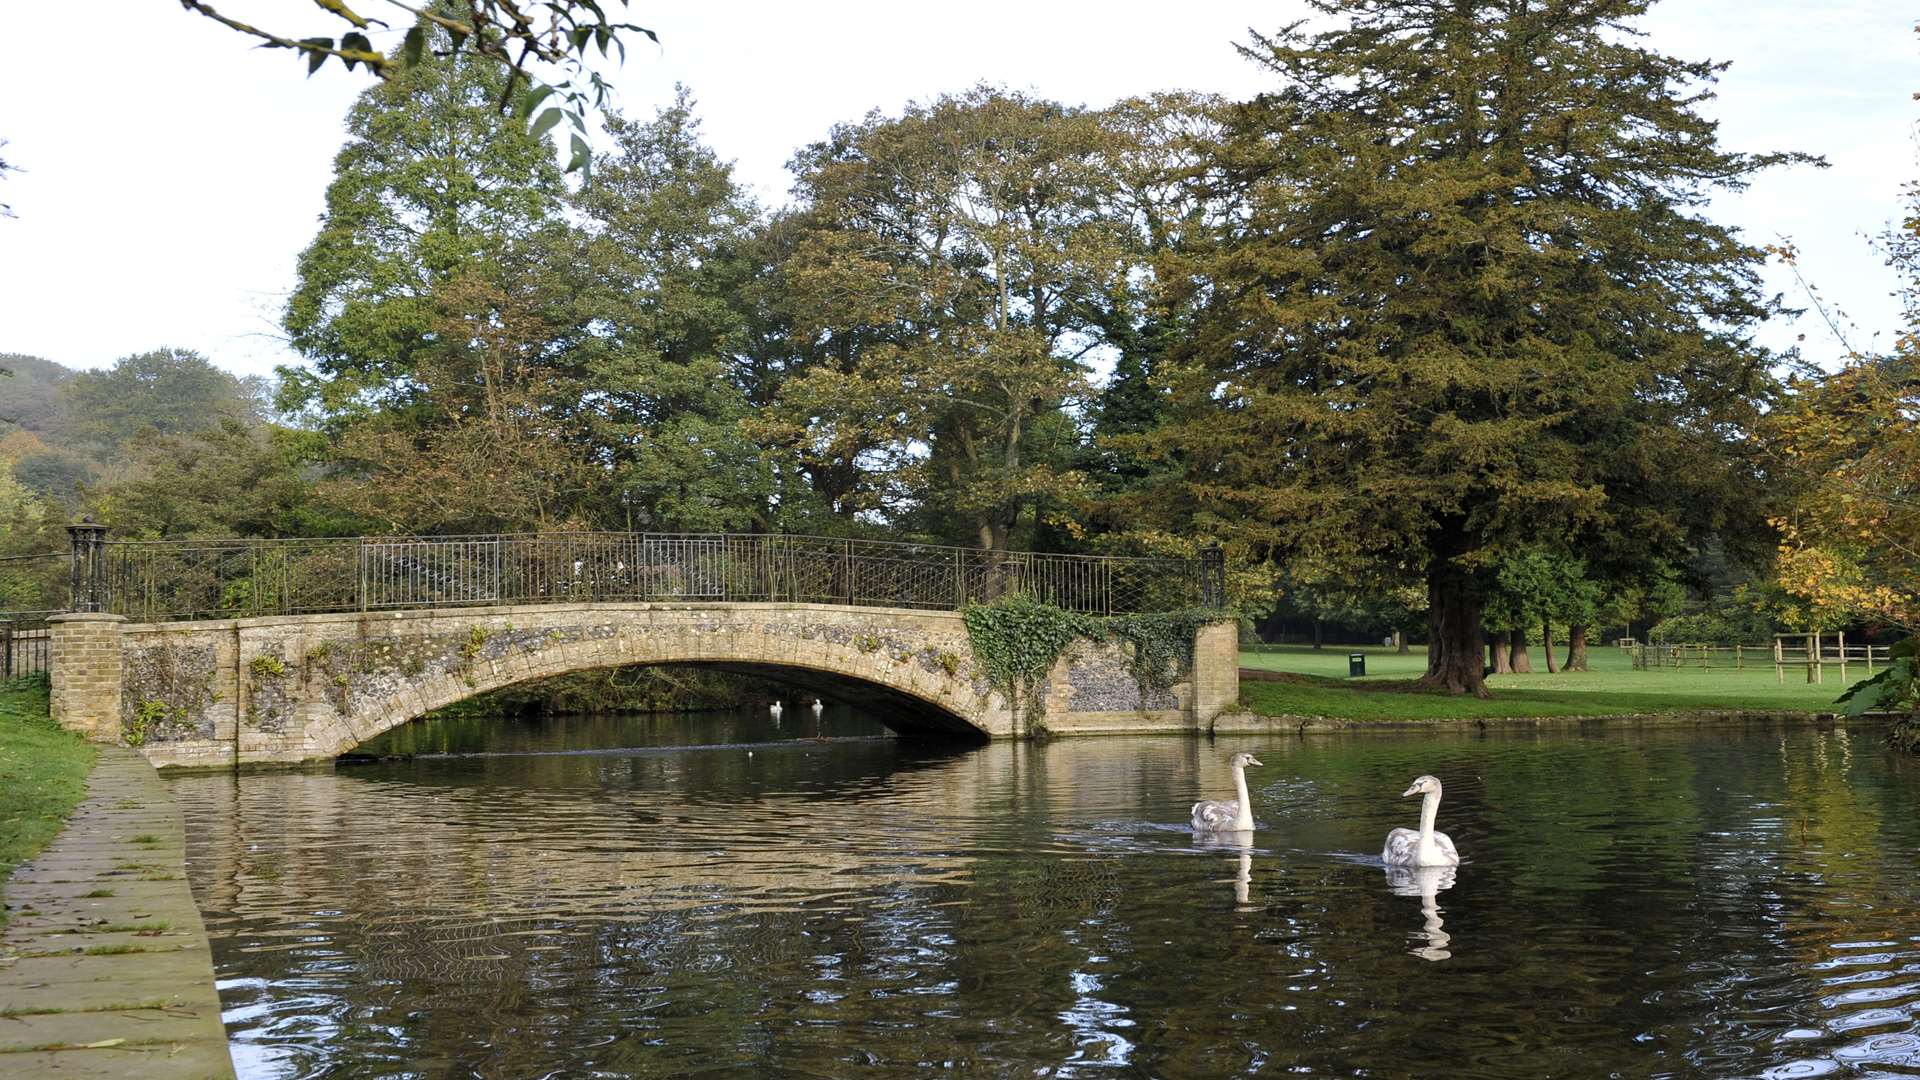 Take time out at Kearsney Abbey, Dover